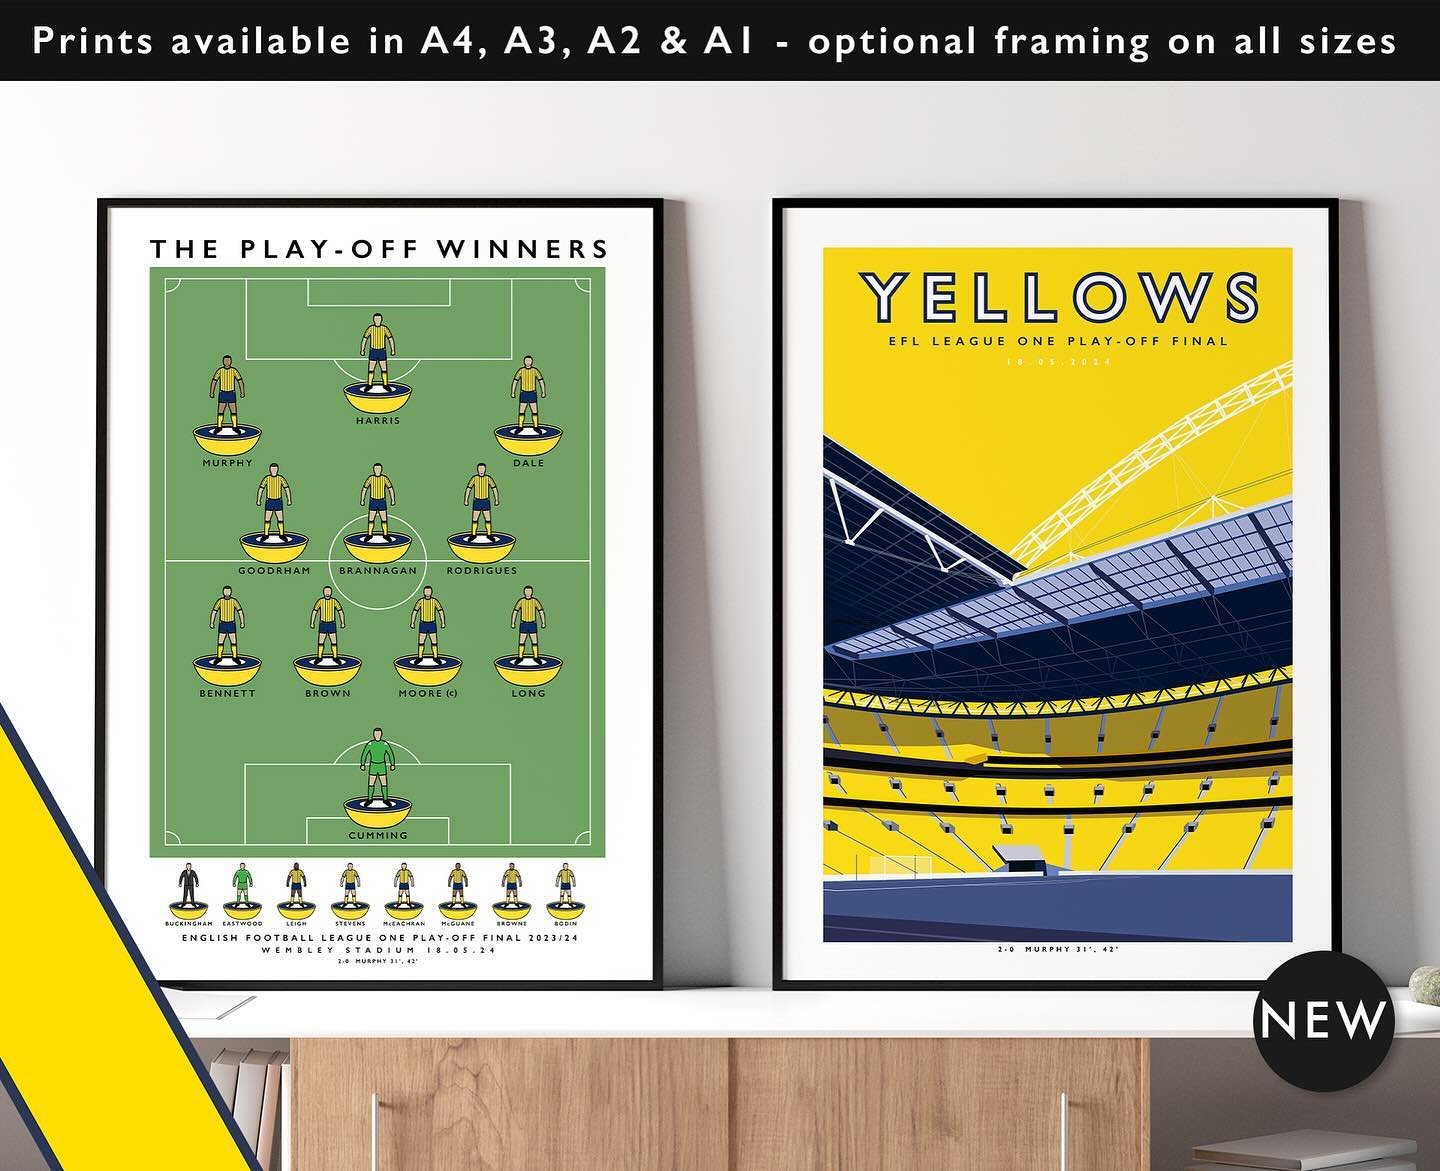 NEW: Oxford United Play-Off Winners 23/24 &amp; Yellows Wembley

Get 10% off until midnight on Monday with the discount code YELLOWS

Shop now: matthewjiwood.com/subbuteo-xis/o&hellip;

Prints available in A4, A3, A2 &amp; A1 with optional framing

#